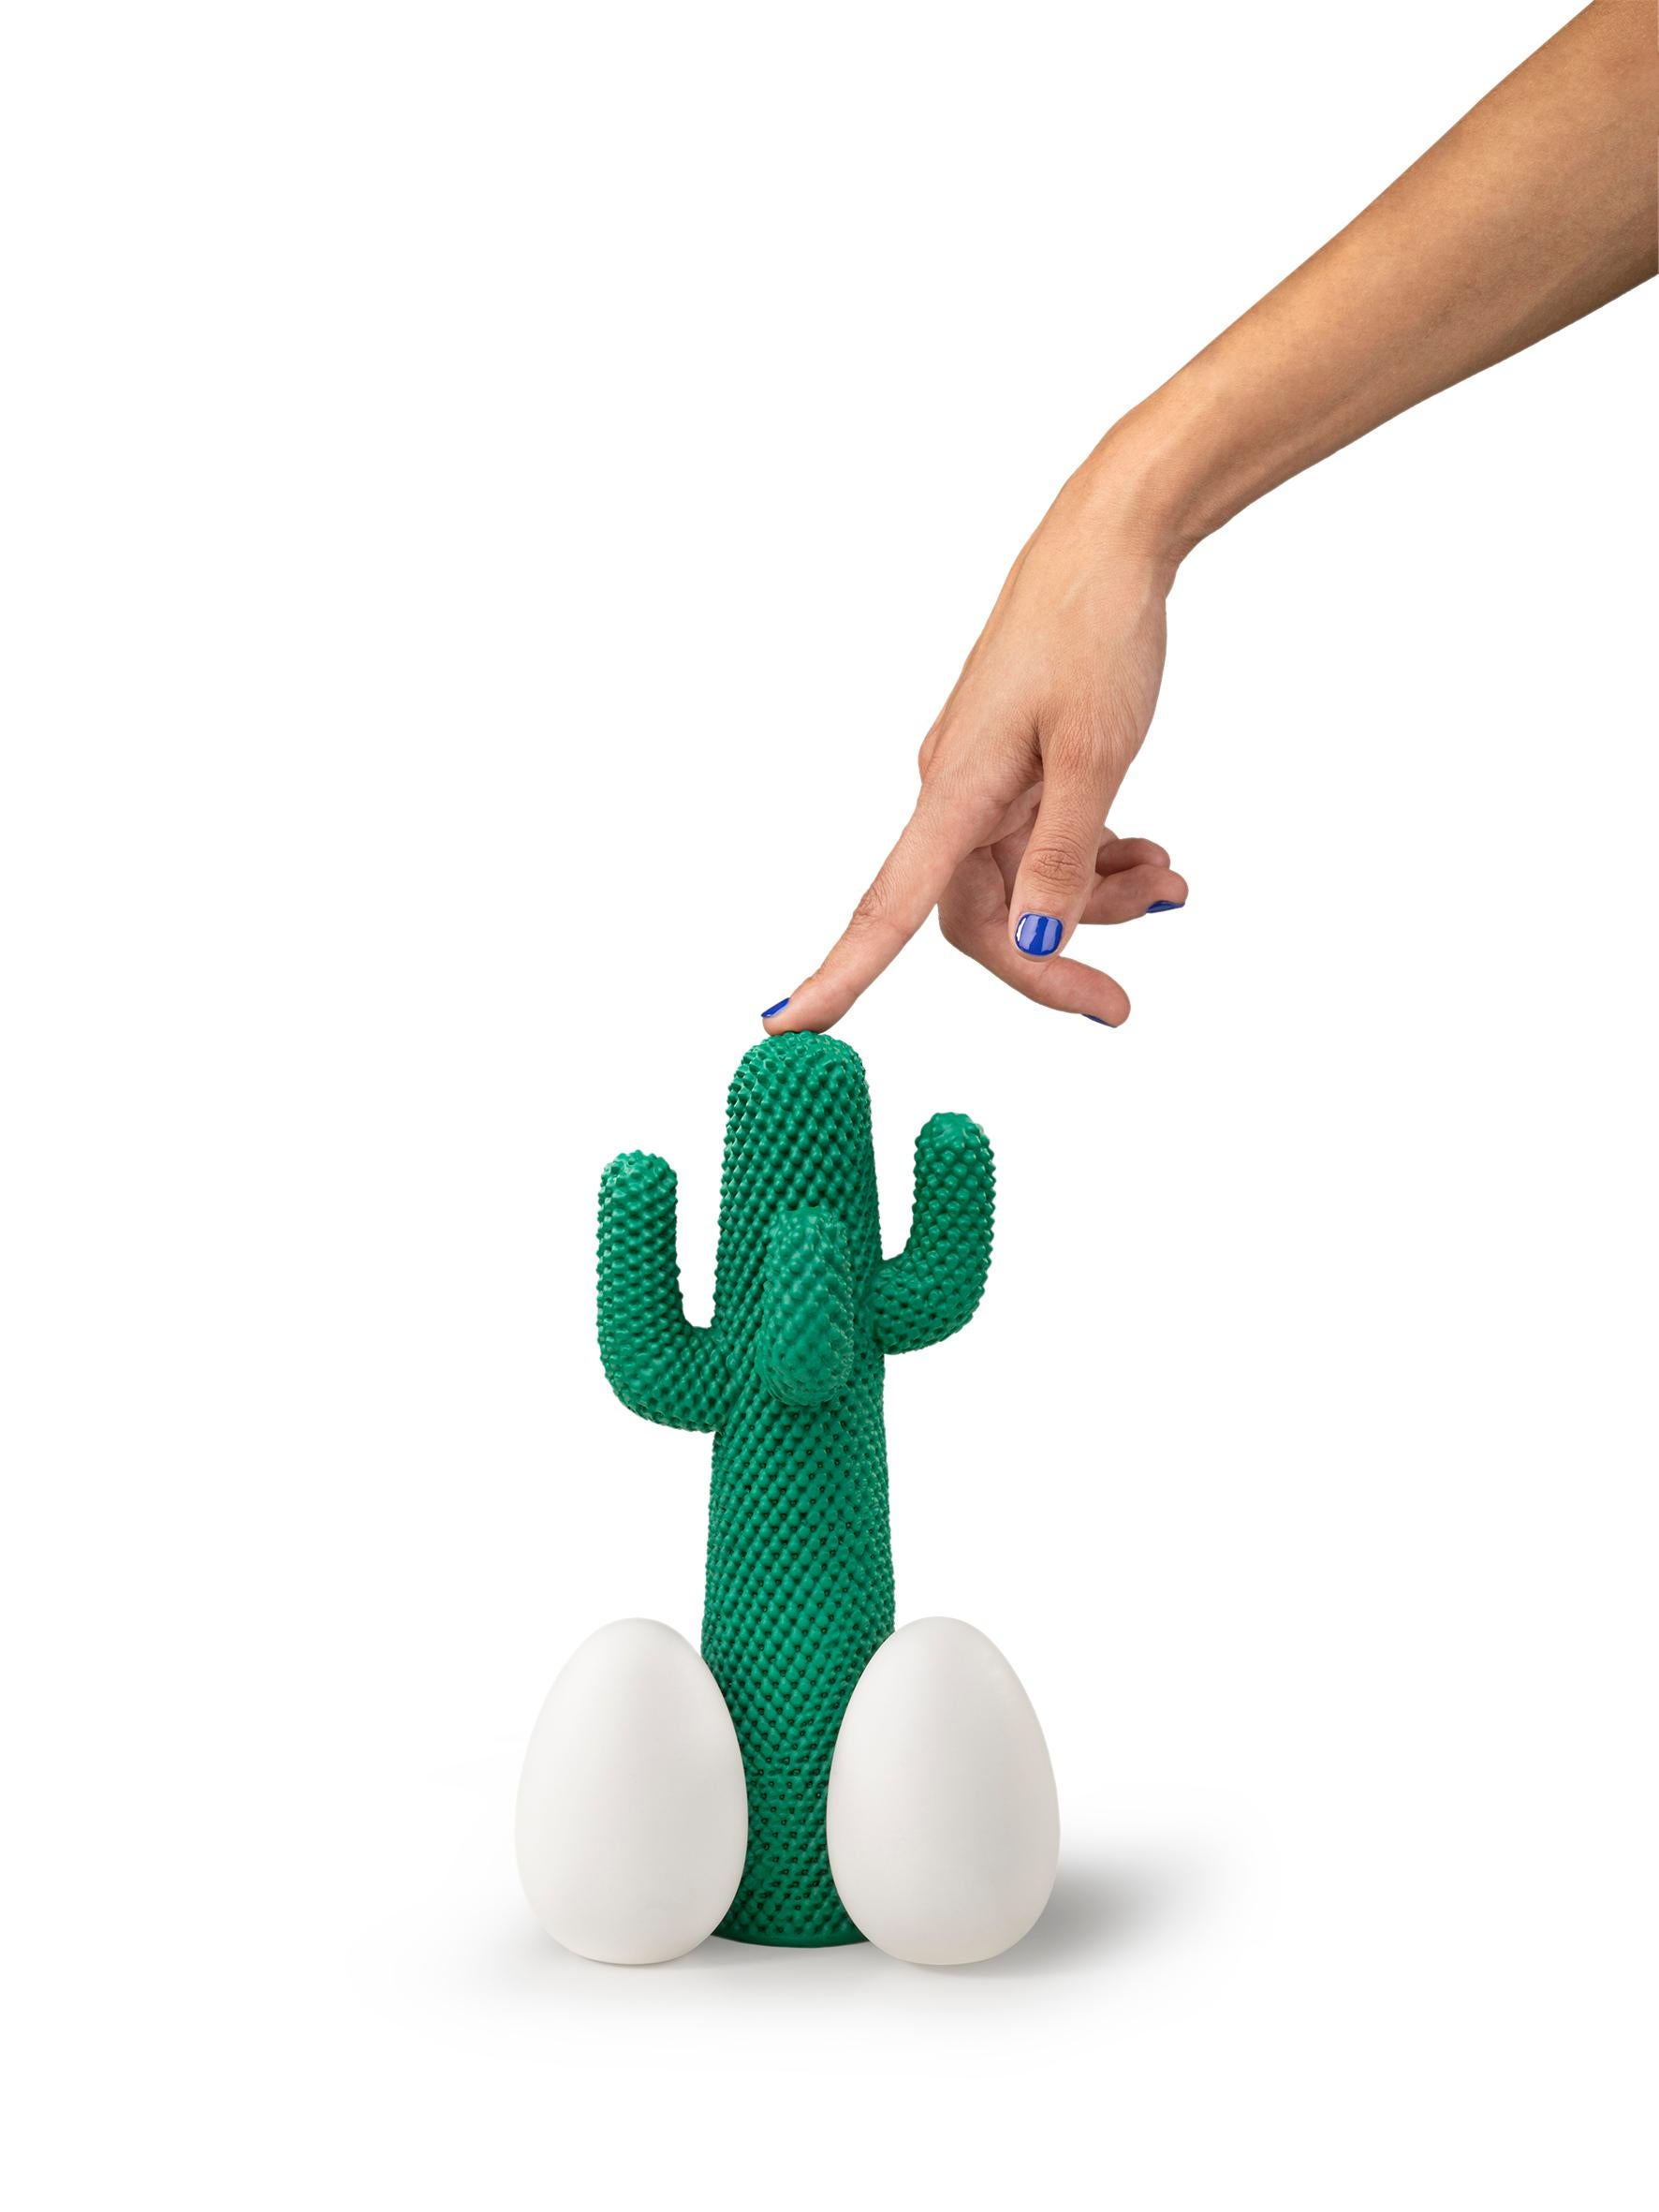 The little GOD, a miniature version of Gufram's most iconic collaborations with TOILETPAPER. GOD derives from the union of the Cactus® - designed by Drocco and Mello in 1972 - and the egg-cushions of La Cova, the giant polyurethane nest designed by